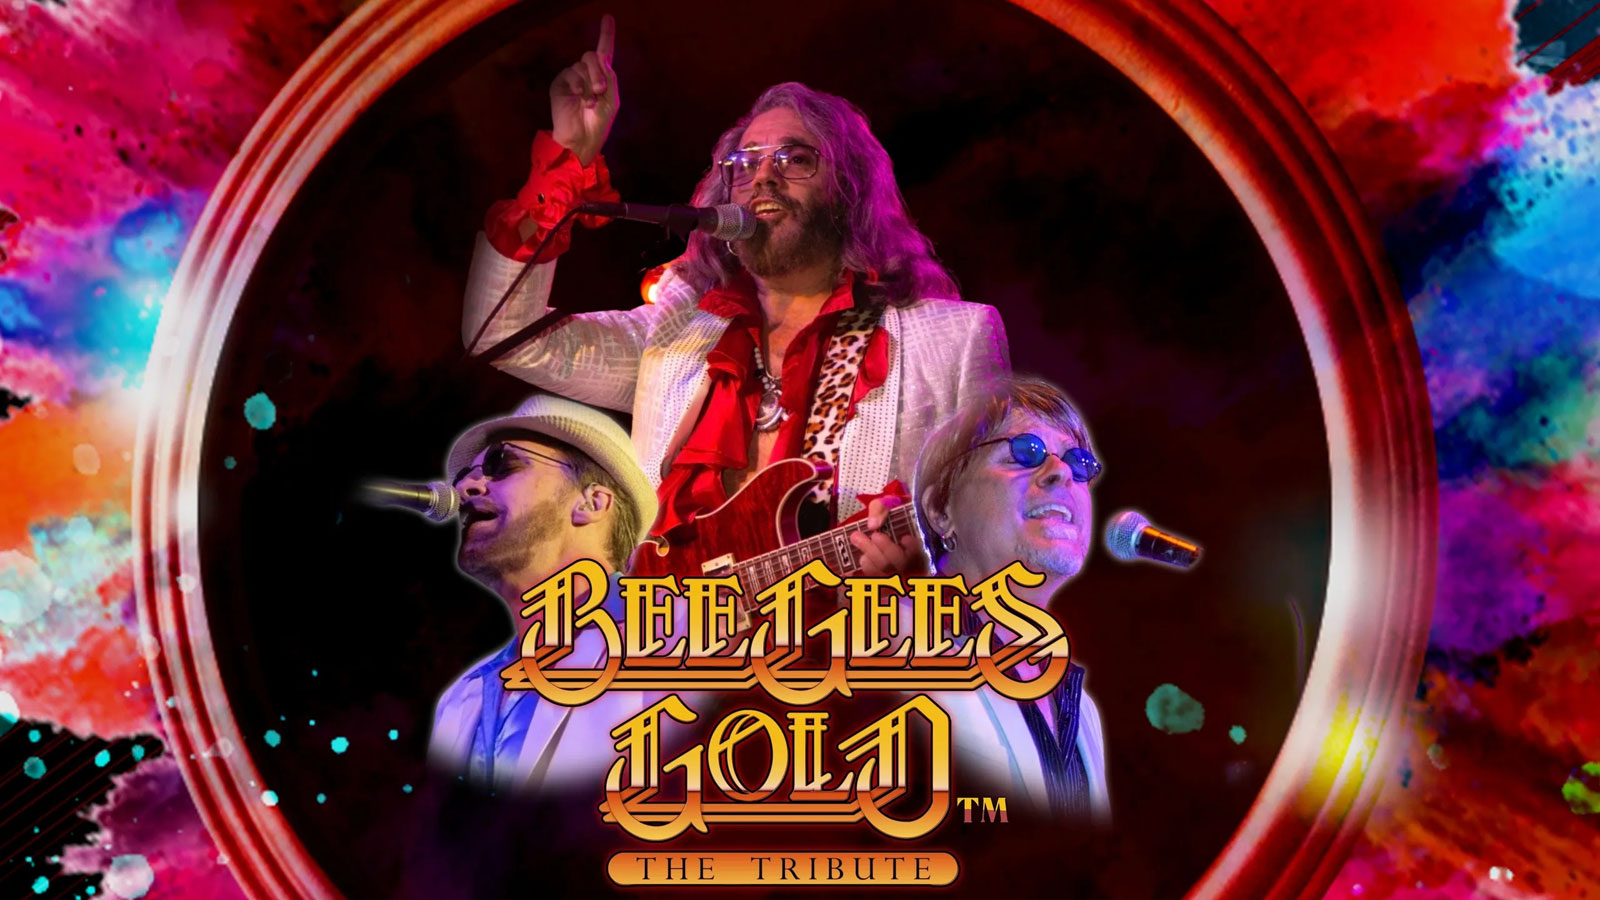 Composite of singers dressed as Gibbs with Bee Gees Gold logo